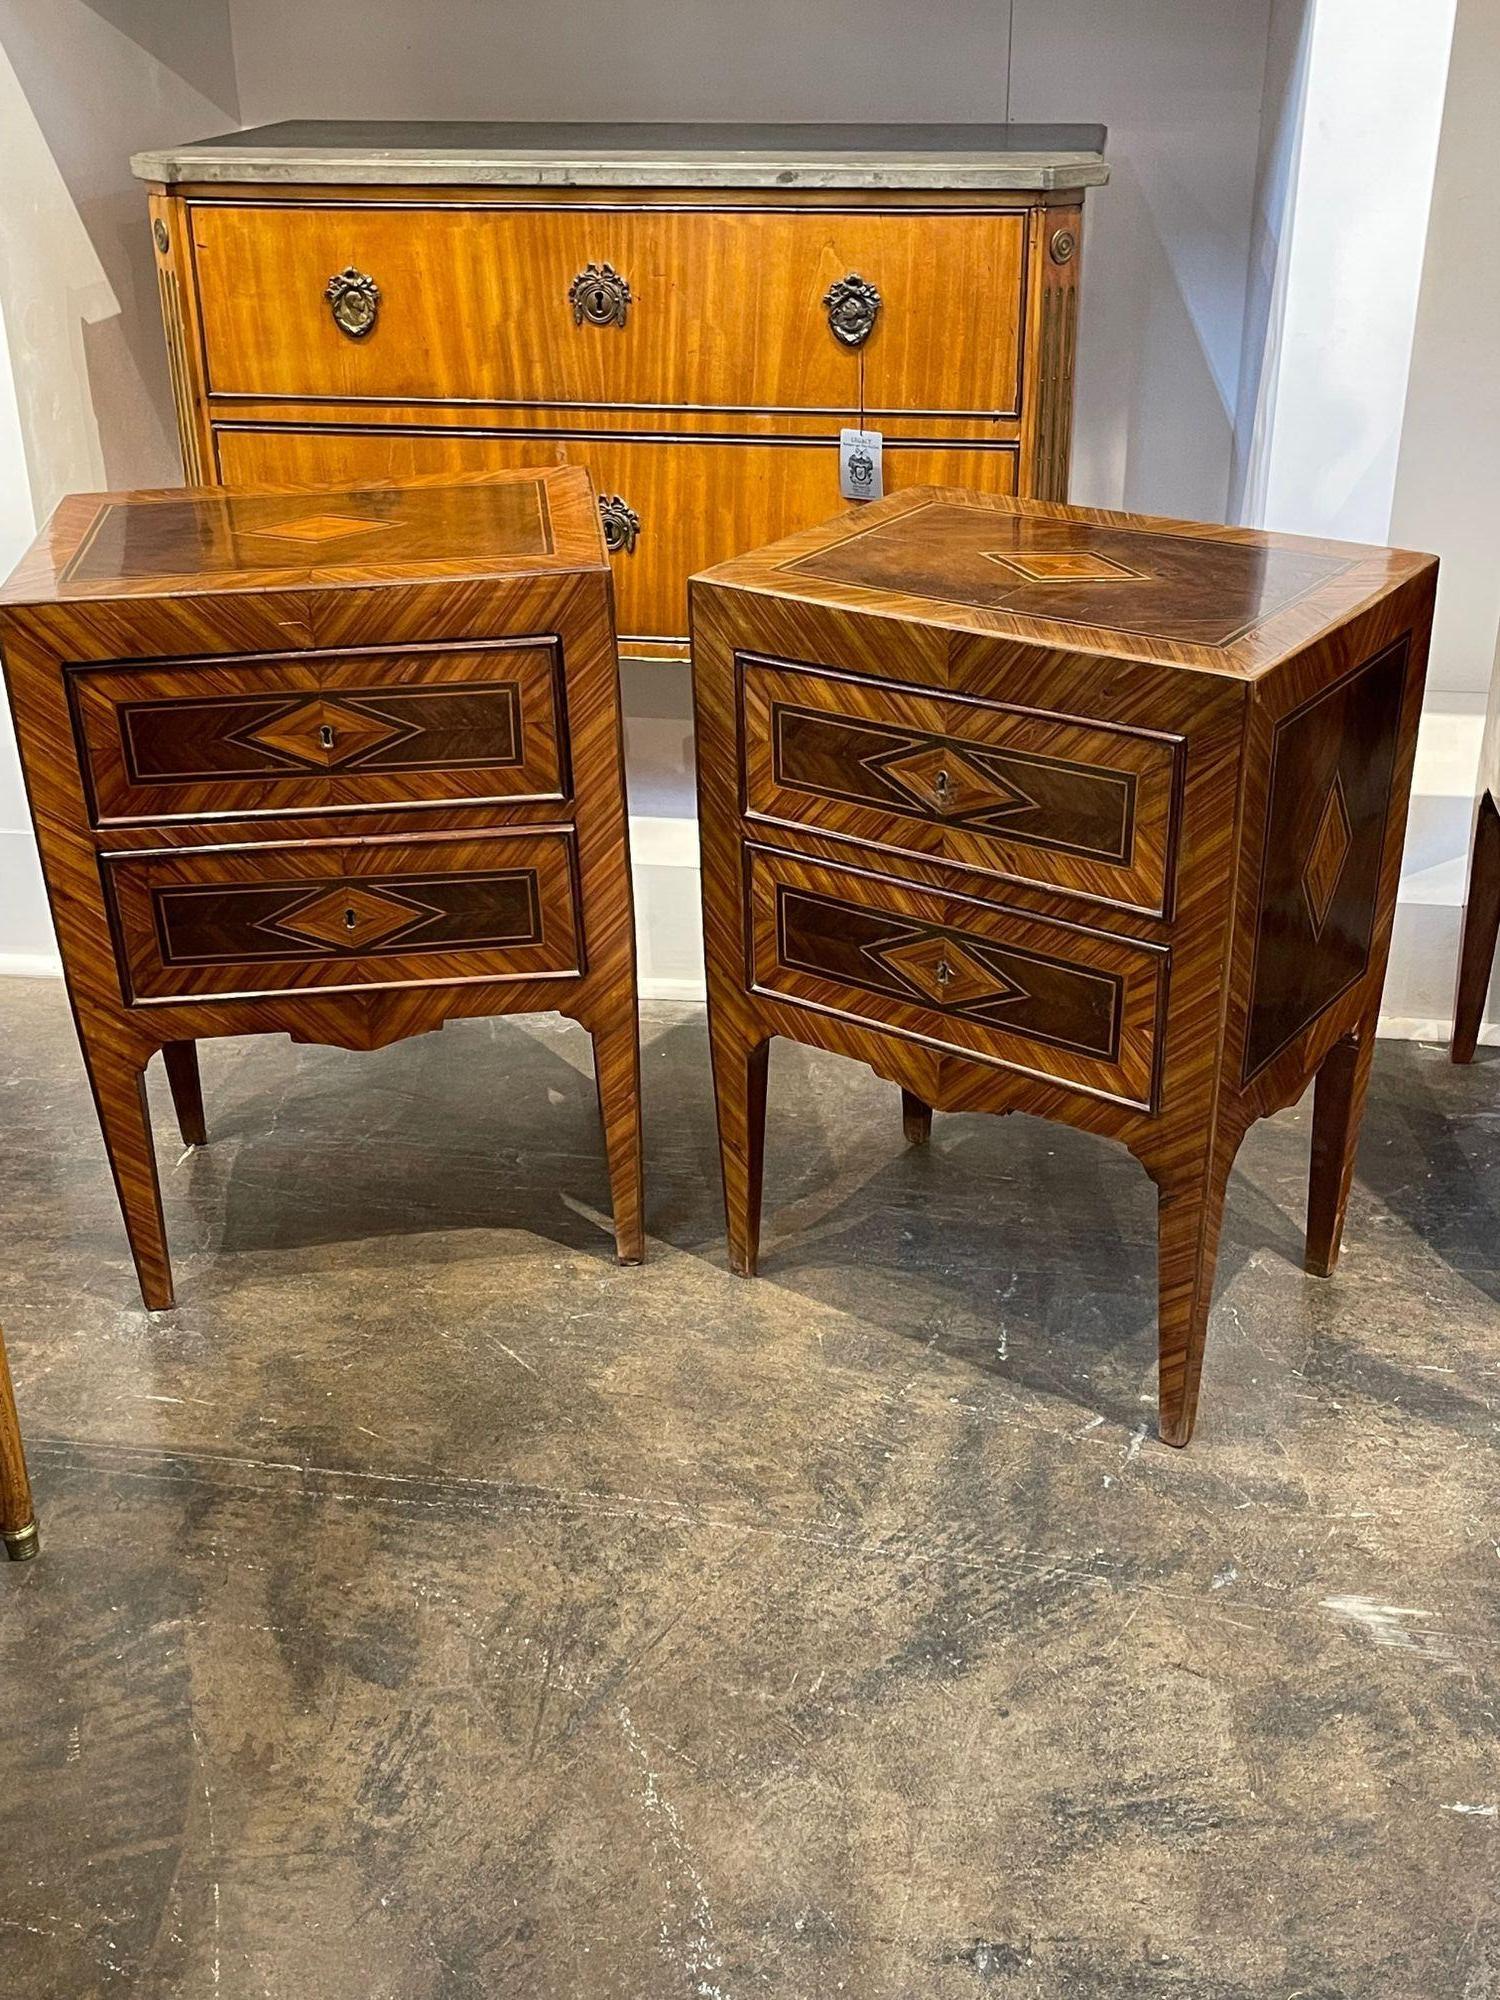 Handsome pair of Italian neo-classical exotic veneer diamond inlay side tables. Circa 1890. Perfect for today's transitional designs!